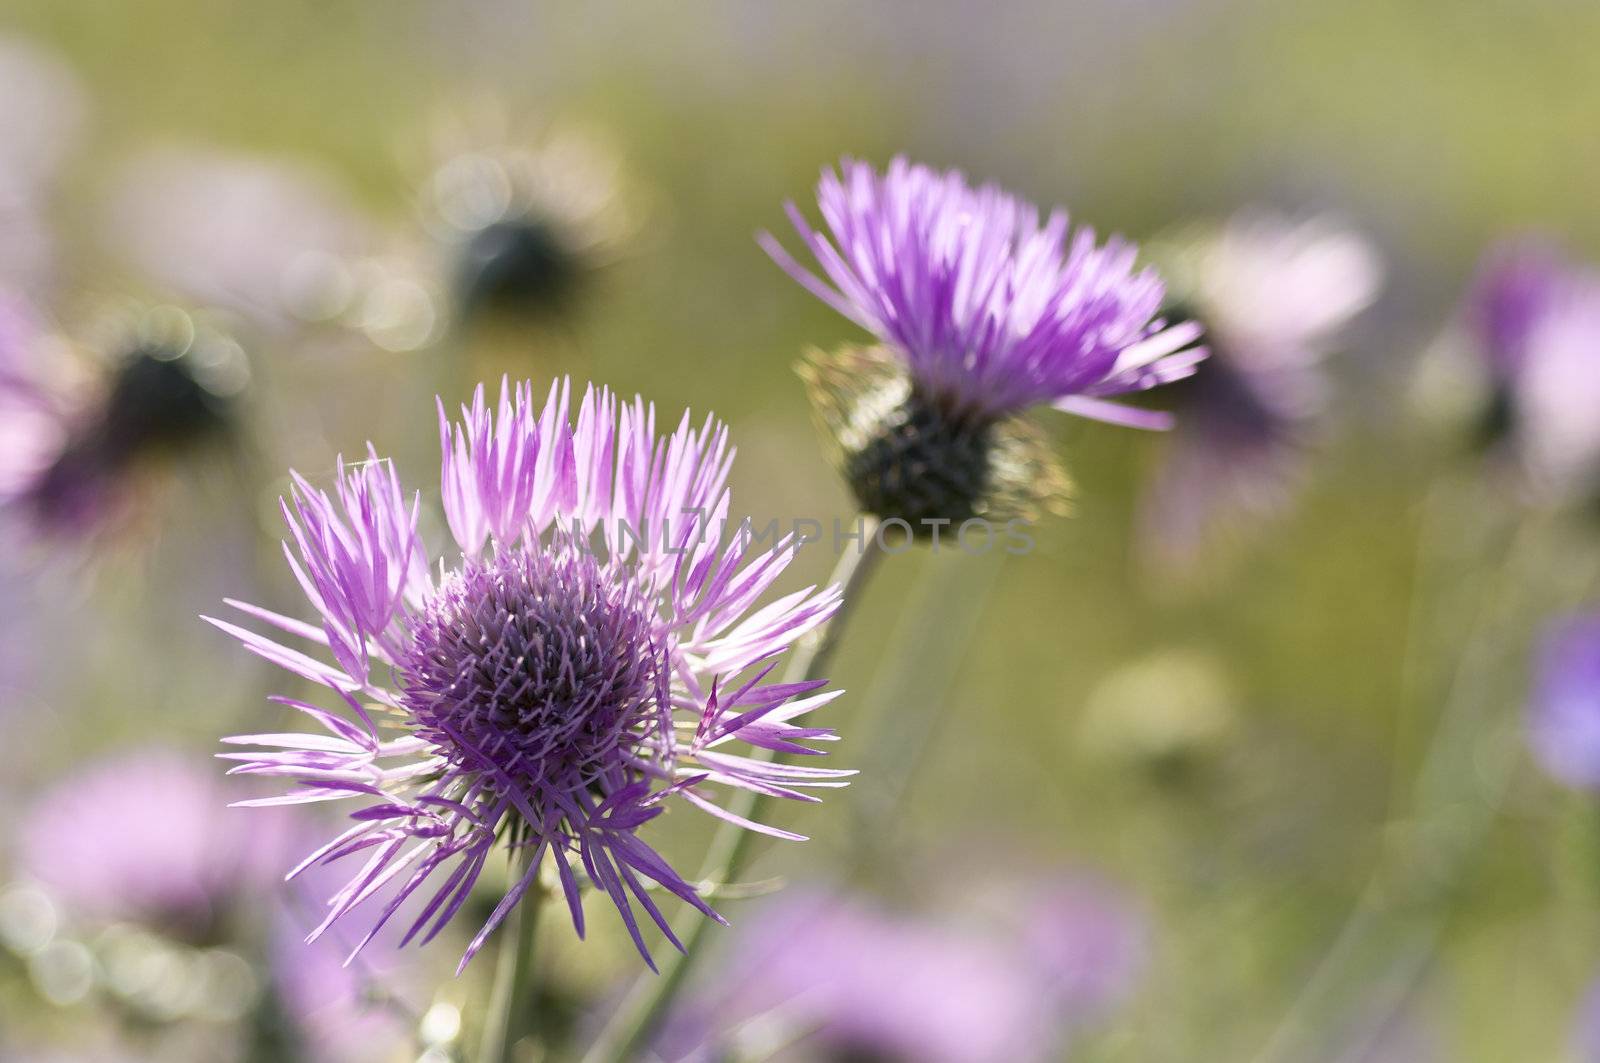 Close-up of Purple Milk Thistle flowers - Galactites tomentosa - in Alentejo, Portugal